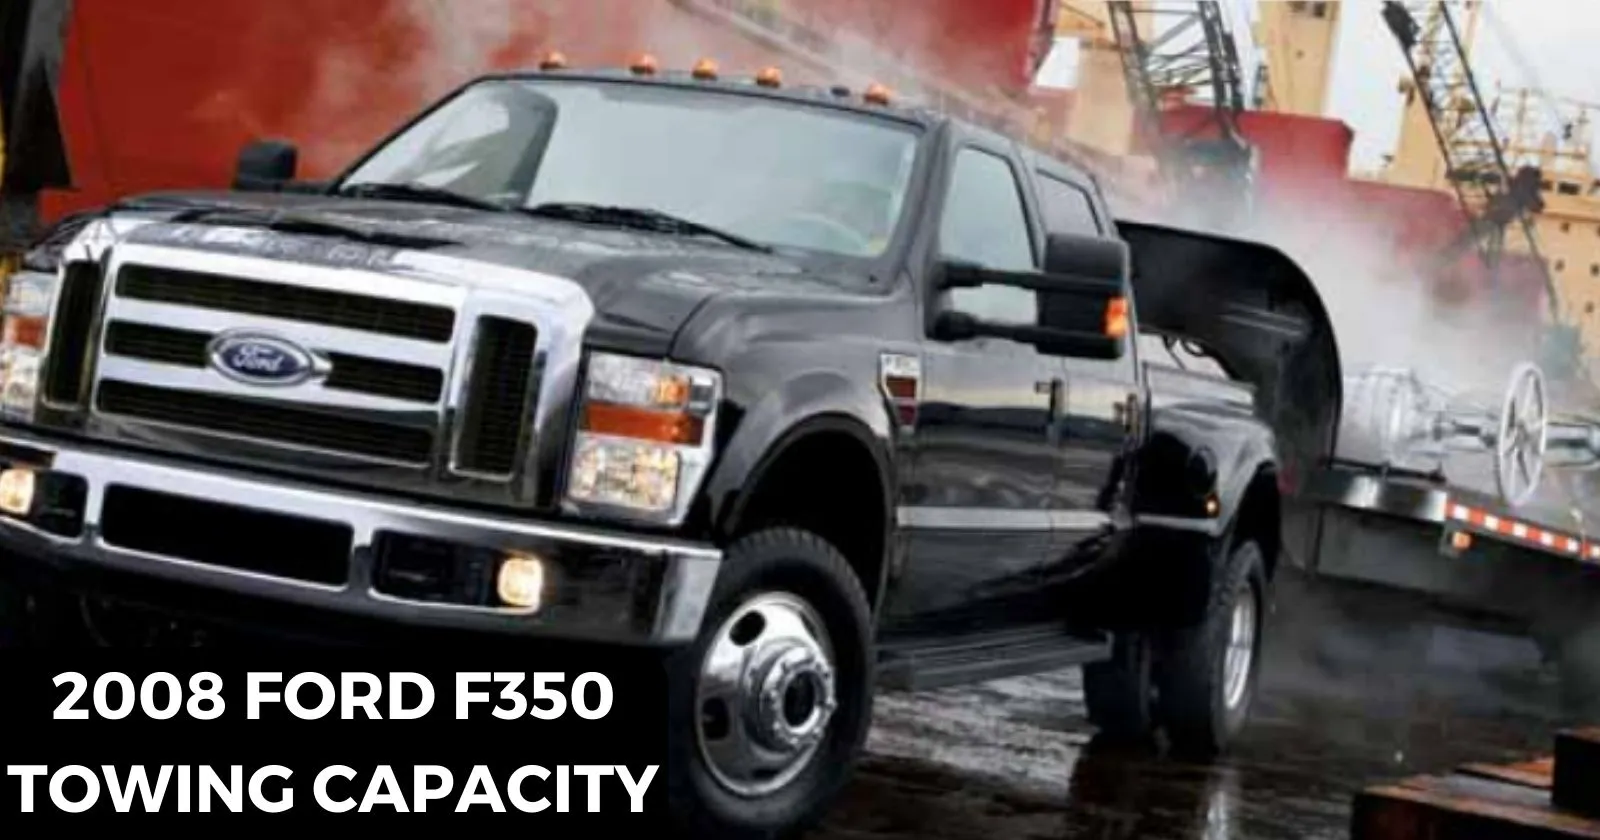 explore-2008-ford-f350-towing-capacity-with-chart-thecartowing